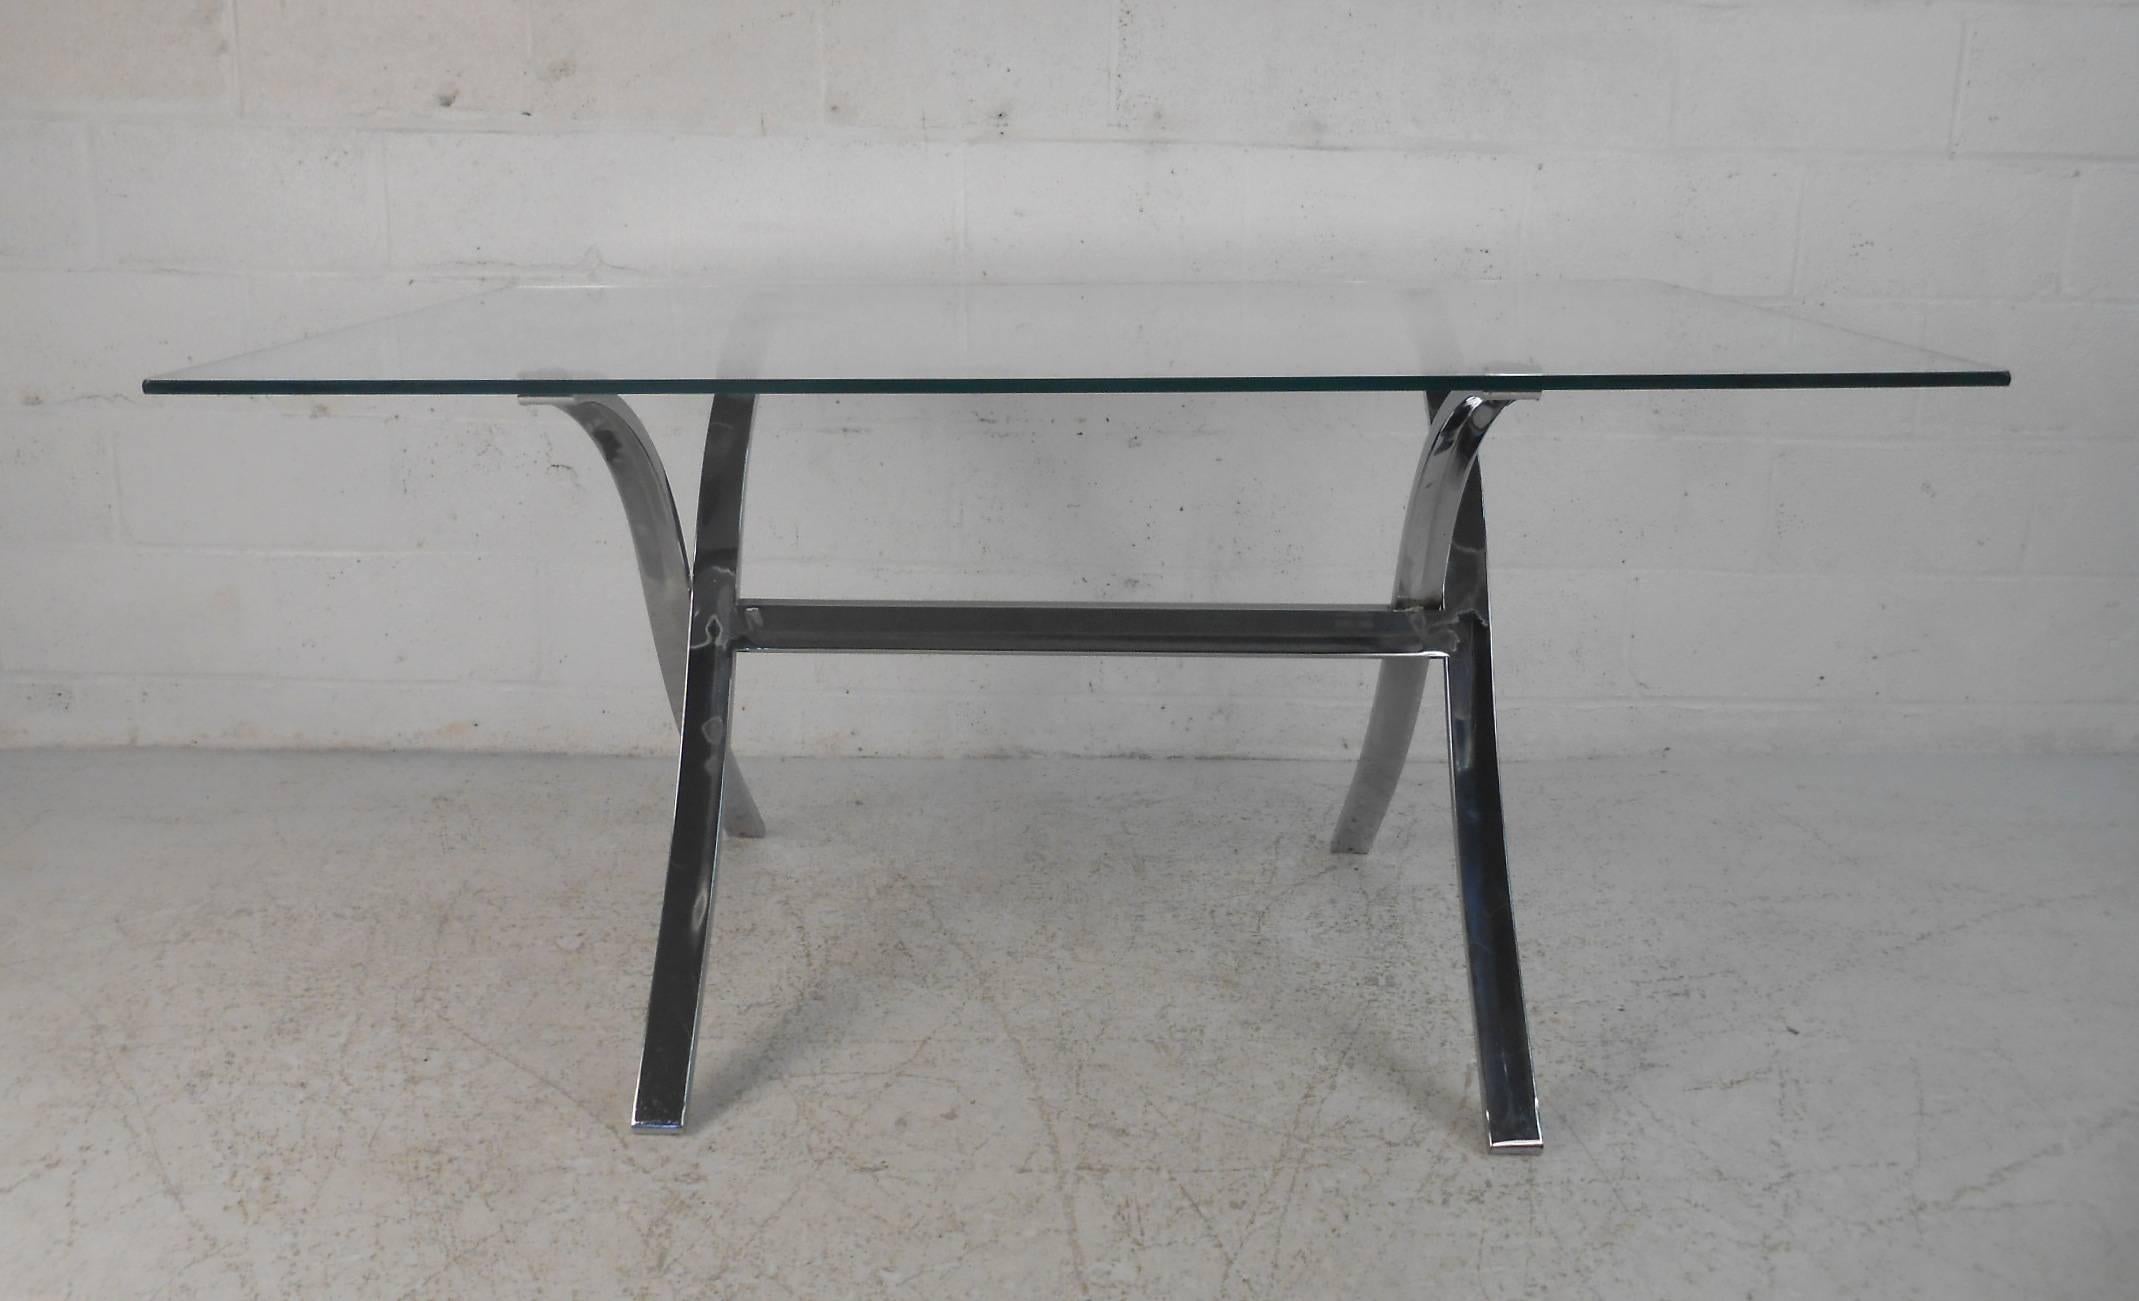 This beautiful vintage modern dining table features a flat bar chrome 